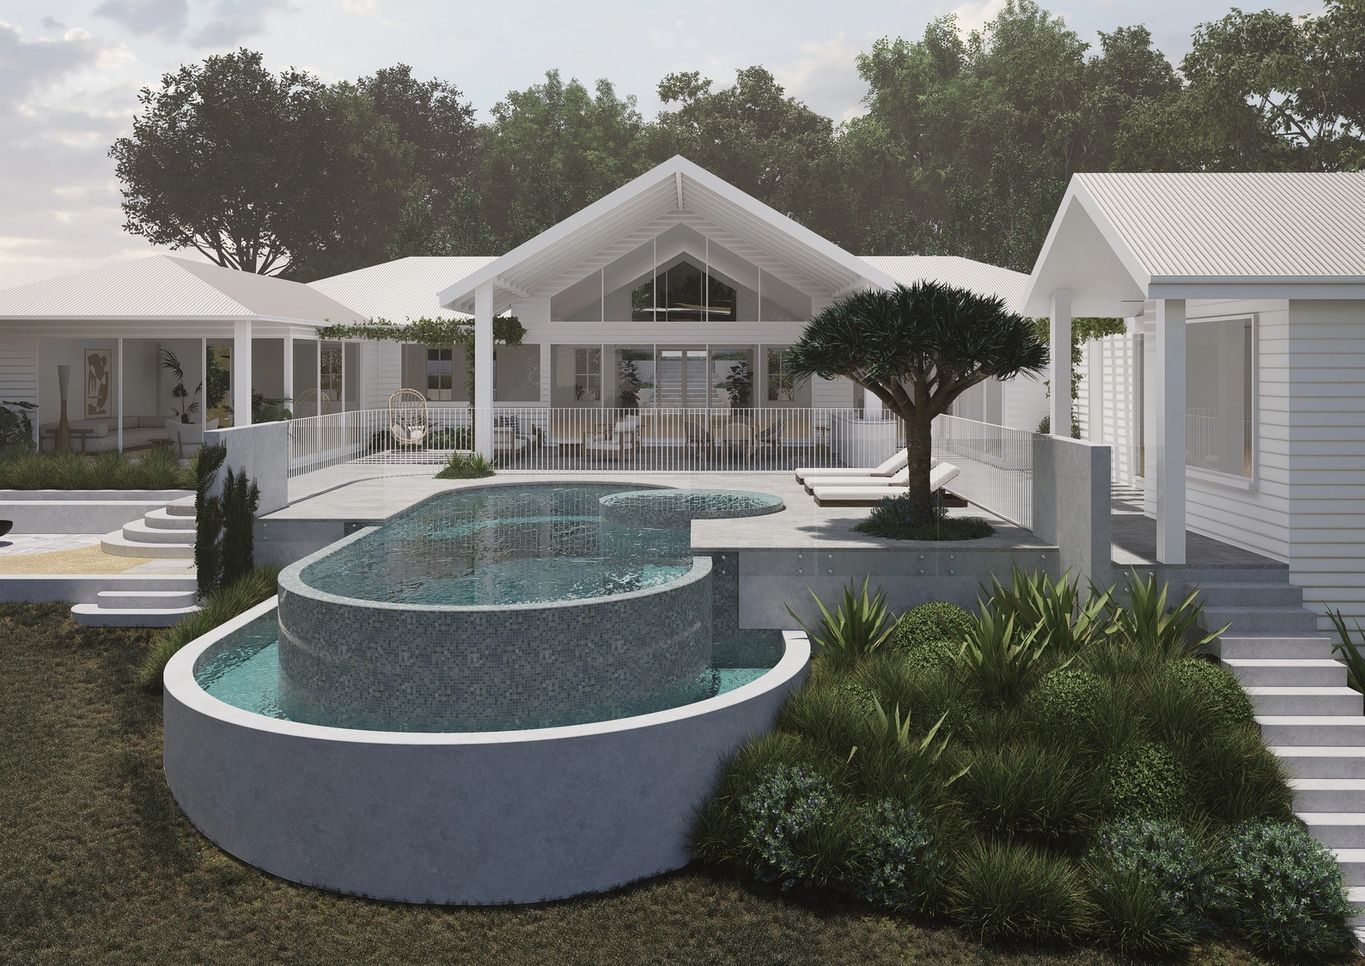 Infinity edge pill shape pool and spa design in front of modern white country home